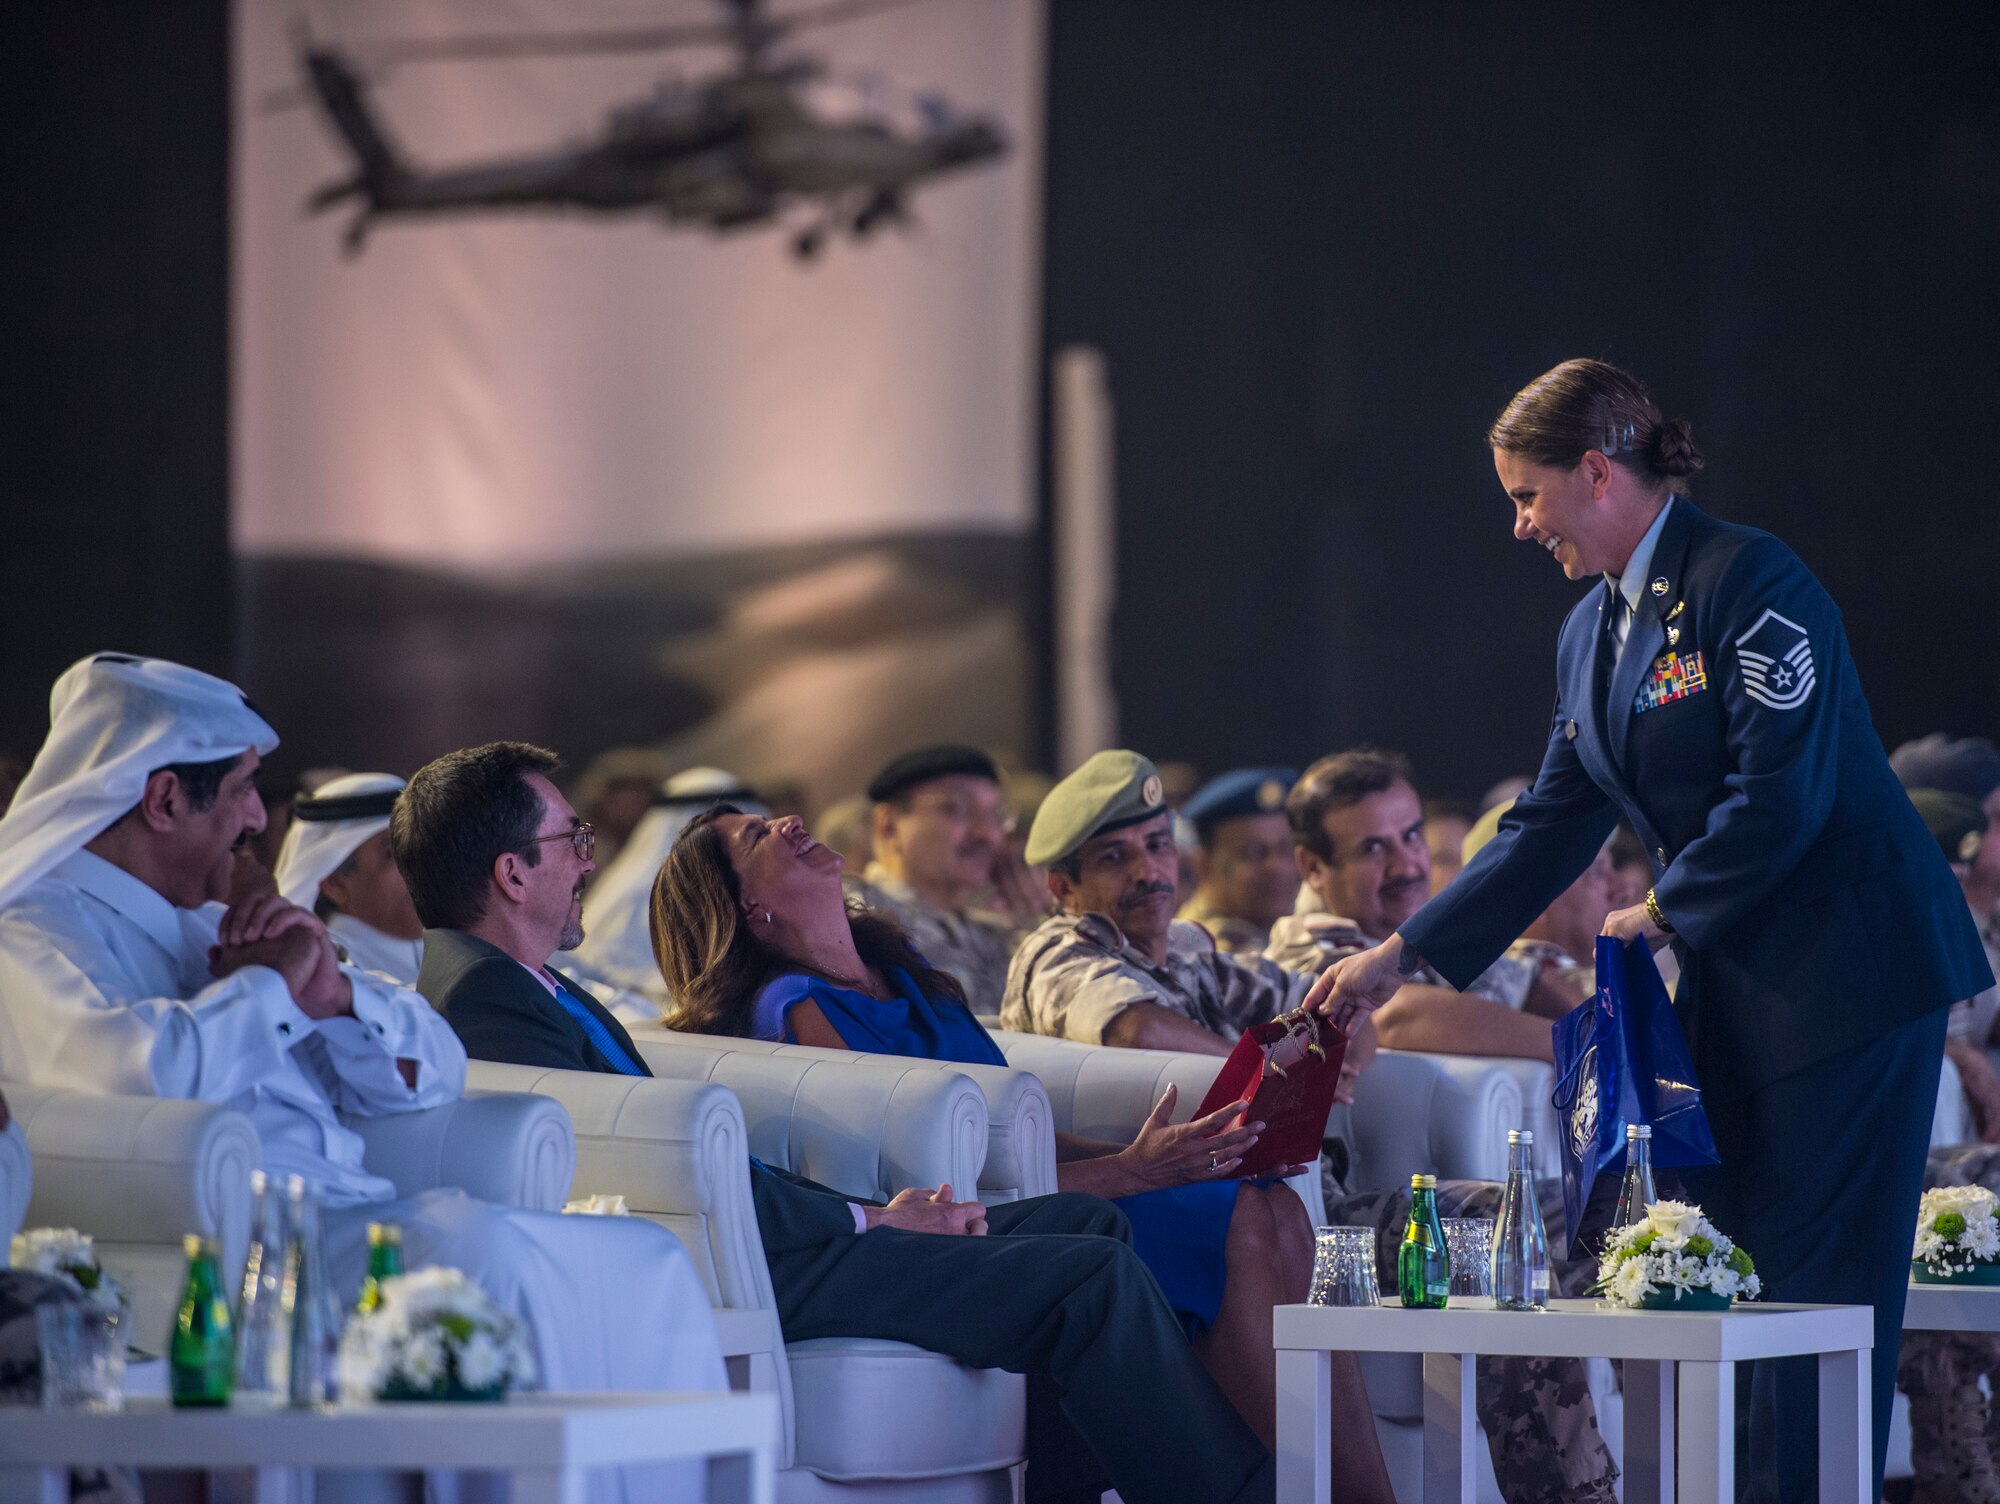 Mrs. Kathy Harrigian, spouse of Lt. Gen. Jeffrey L. Harrigian, outgoing U.S. Air Forces Central Command (AFCENT) commander, is presented a gift by a proffer during the AFCENT change of command ceremony at Al Udeid Air Base, Qatar, Aug. 30, 2018. Lt. Gen. Harrigian served as the AFCENT Commander and Combined Force Air Component Commander beginning in July 2016, and led U.S. and Coalition air operations against ISIS as part of Operation Inherent Resolve in Iraq and Syria and against the Taliban and terrorist networks in Afghanistan as part of Operation Freedom’s Sentinel and the NATO Resolute Support mission in Afghanistan. His next assignment will be as the Deputy Commander, U.S. Air Forces in Europe-Air Forces Africa, at Ramstein Air Base, Germany. (U.S. Air Force photo by Staff Sgt. Keith James)